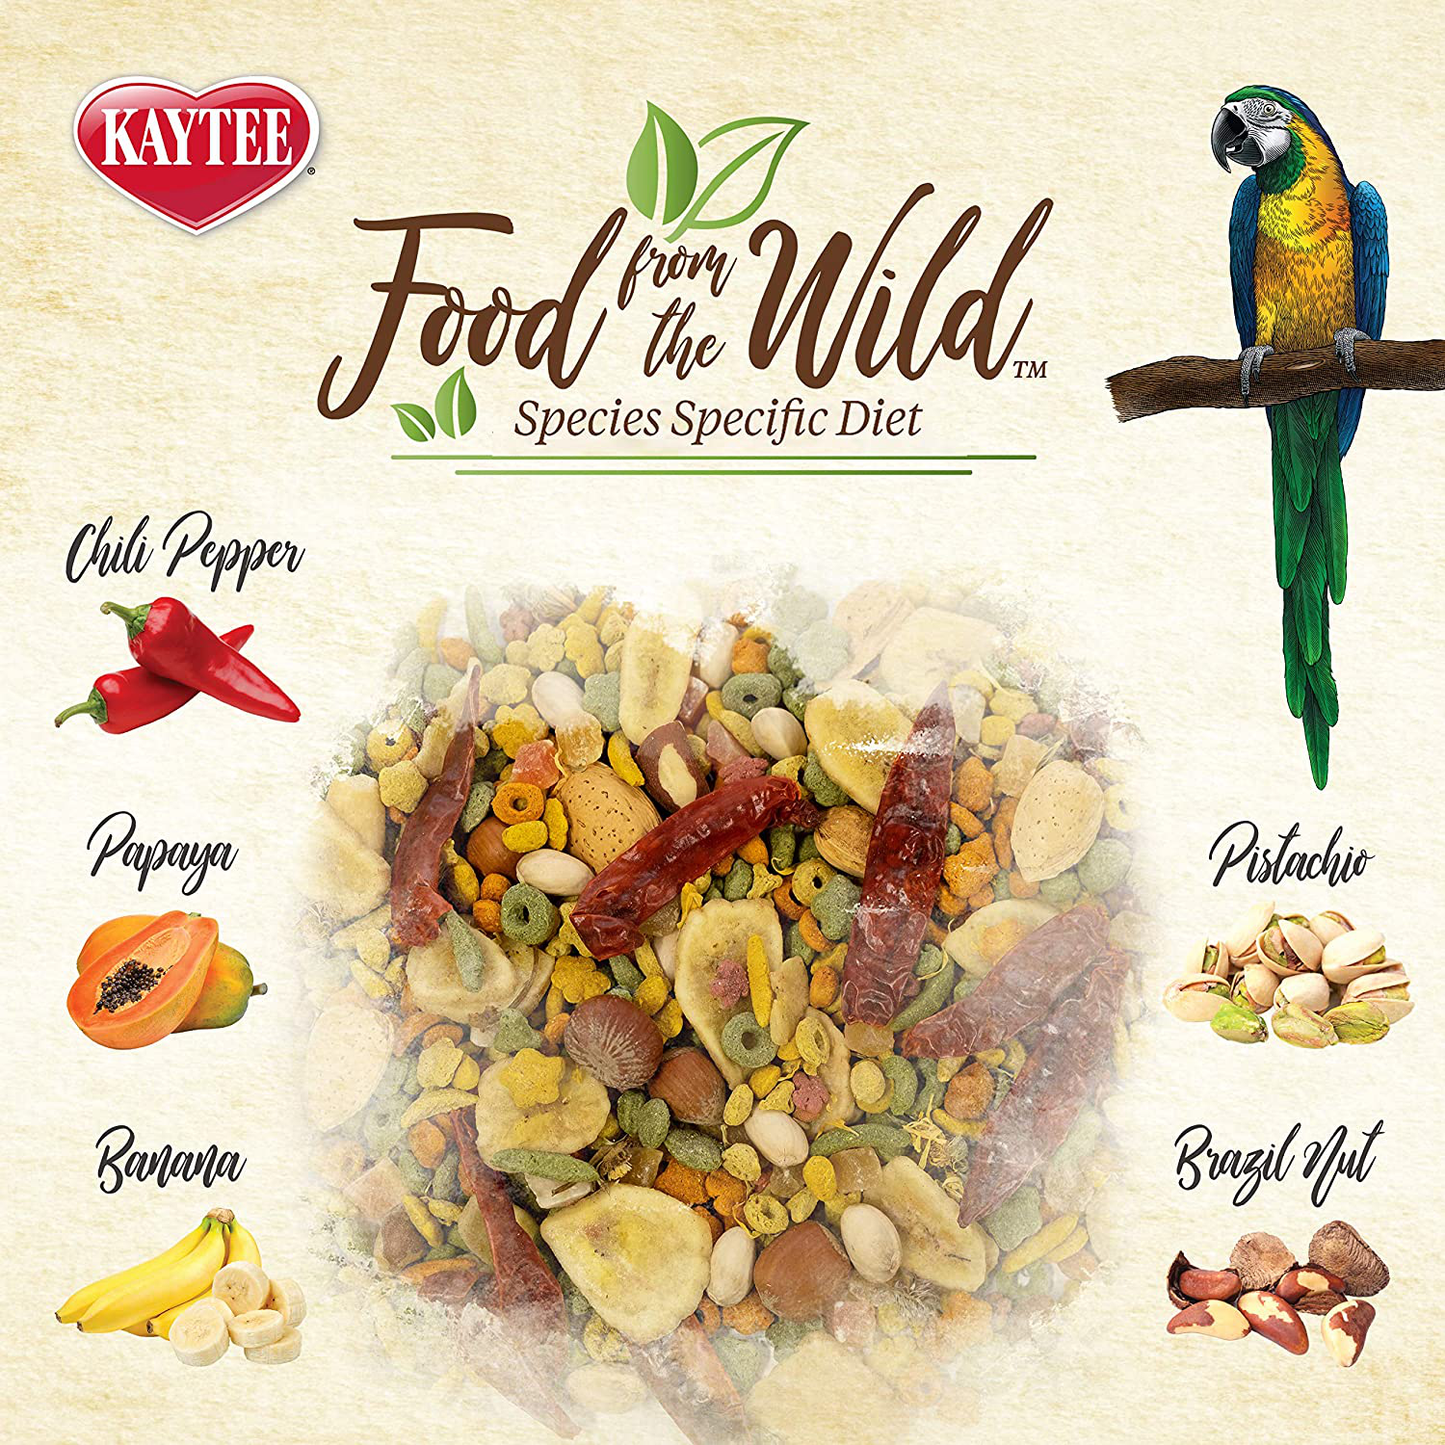 Kaytee Food from the Wild, Macaw Food, 2.5 Pounds